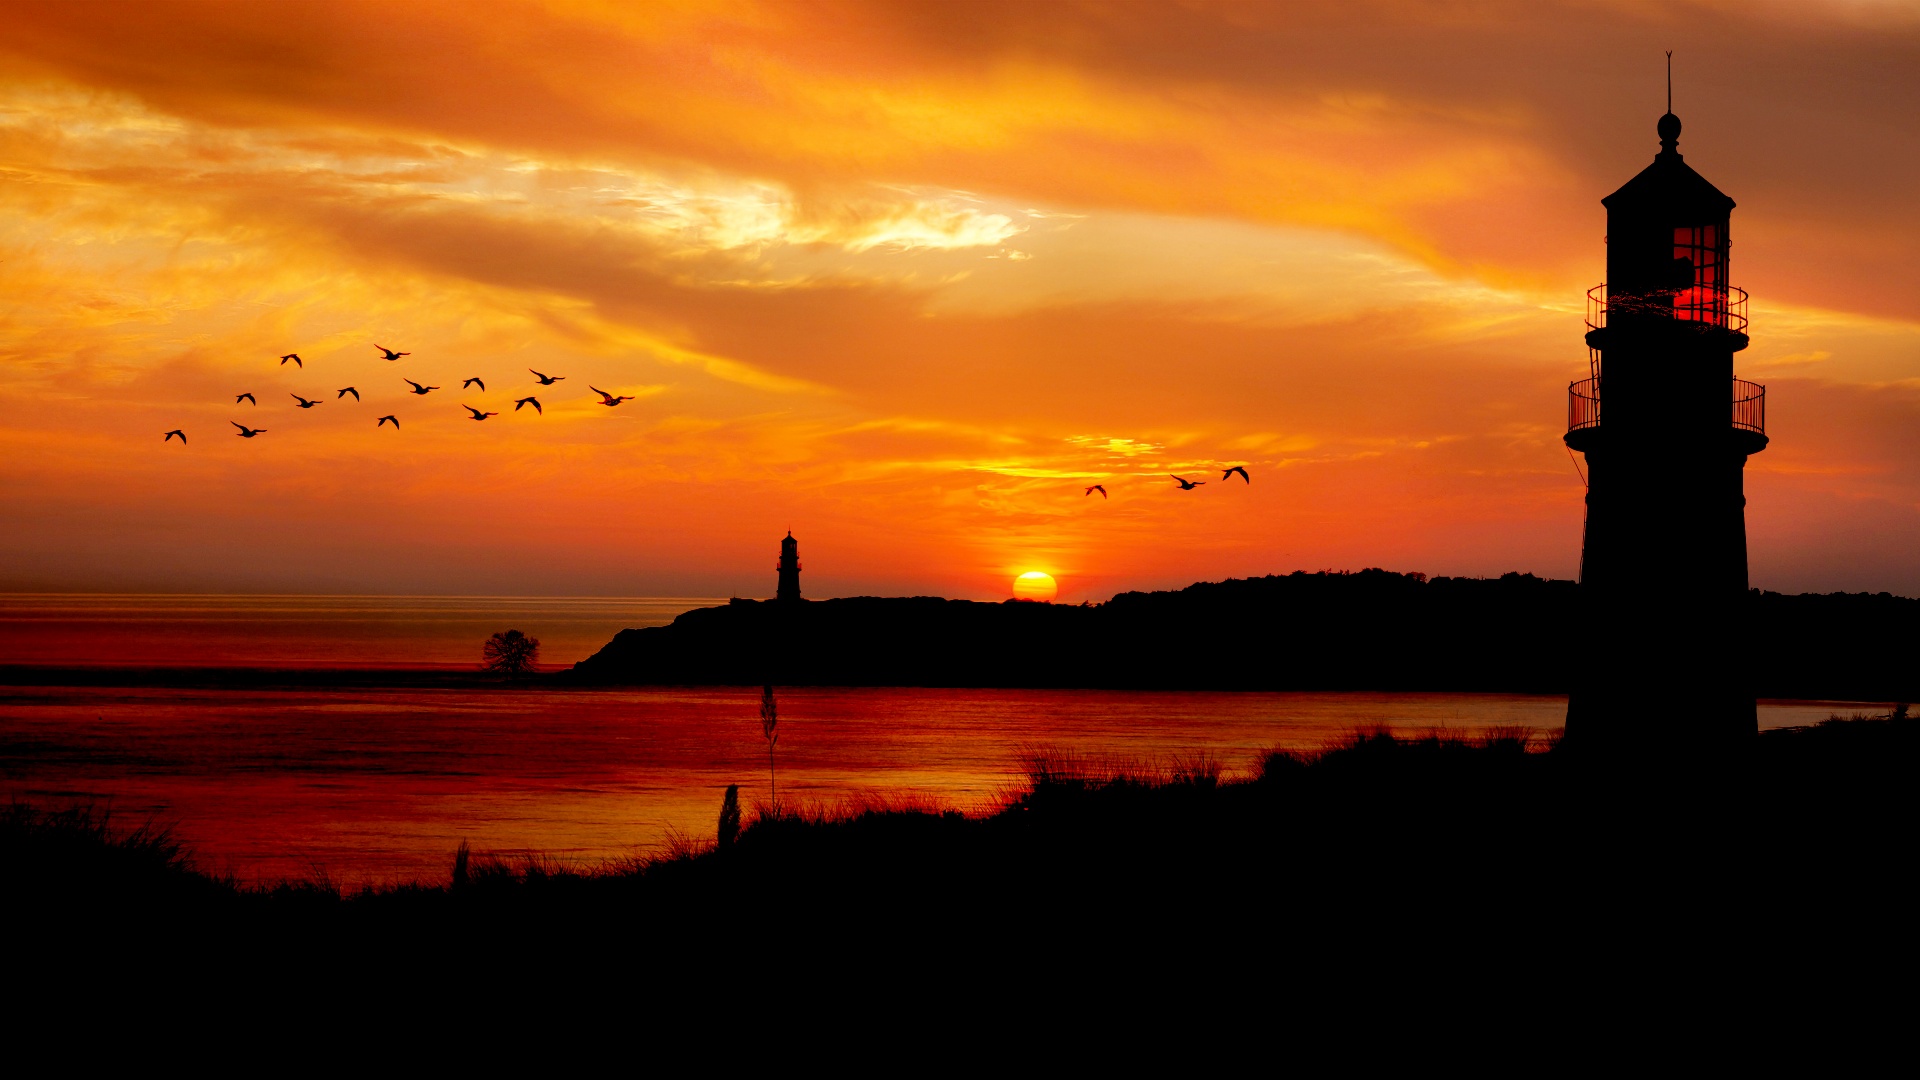 Sunset over the ocean with lighthouse, birds and grass